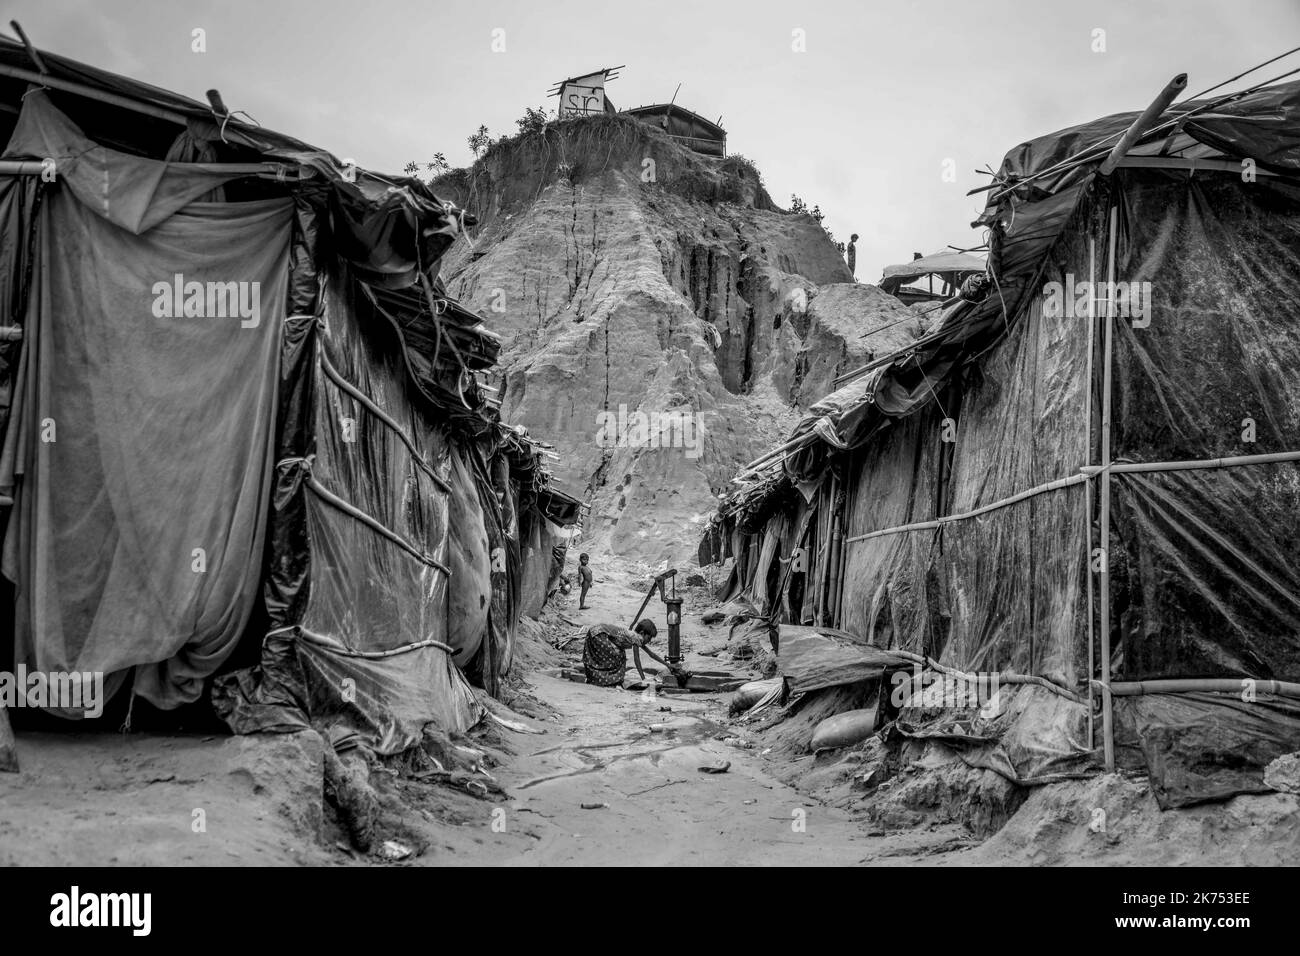 On the border between Burma and Bangladesh, the mass exodus of the Rohingya Muslim community continues. more than 620,000 Rohingyas have fled Burma to escape the violence of the Burmese army. Refugees are piling up in overcrowded camps in appalling conditions. Stock Photo